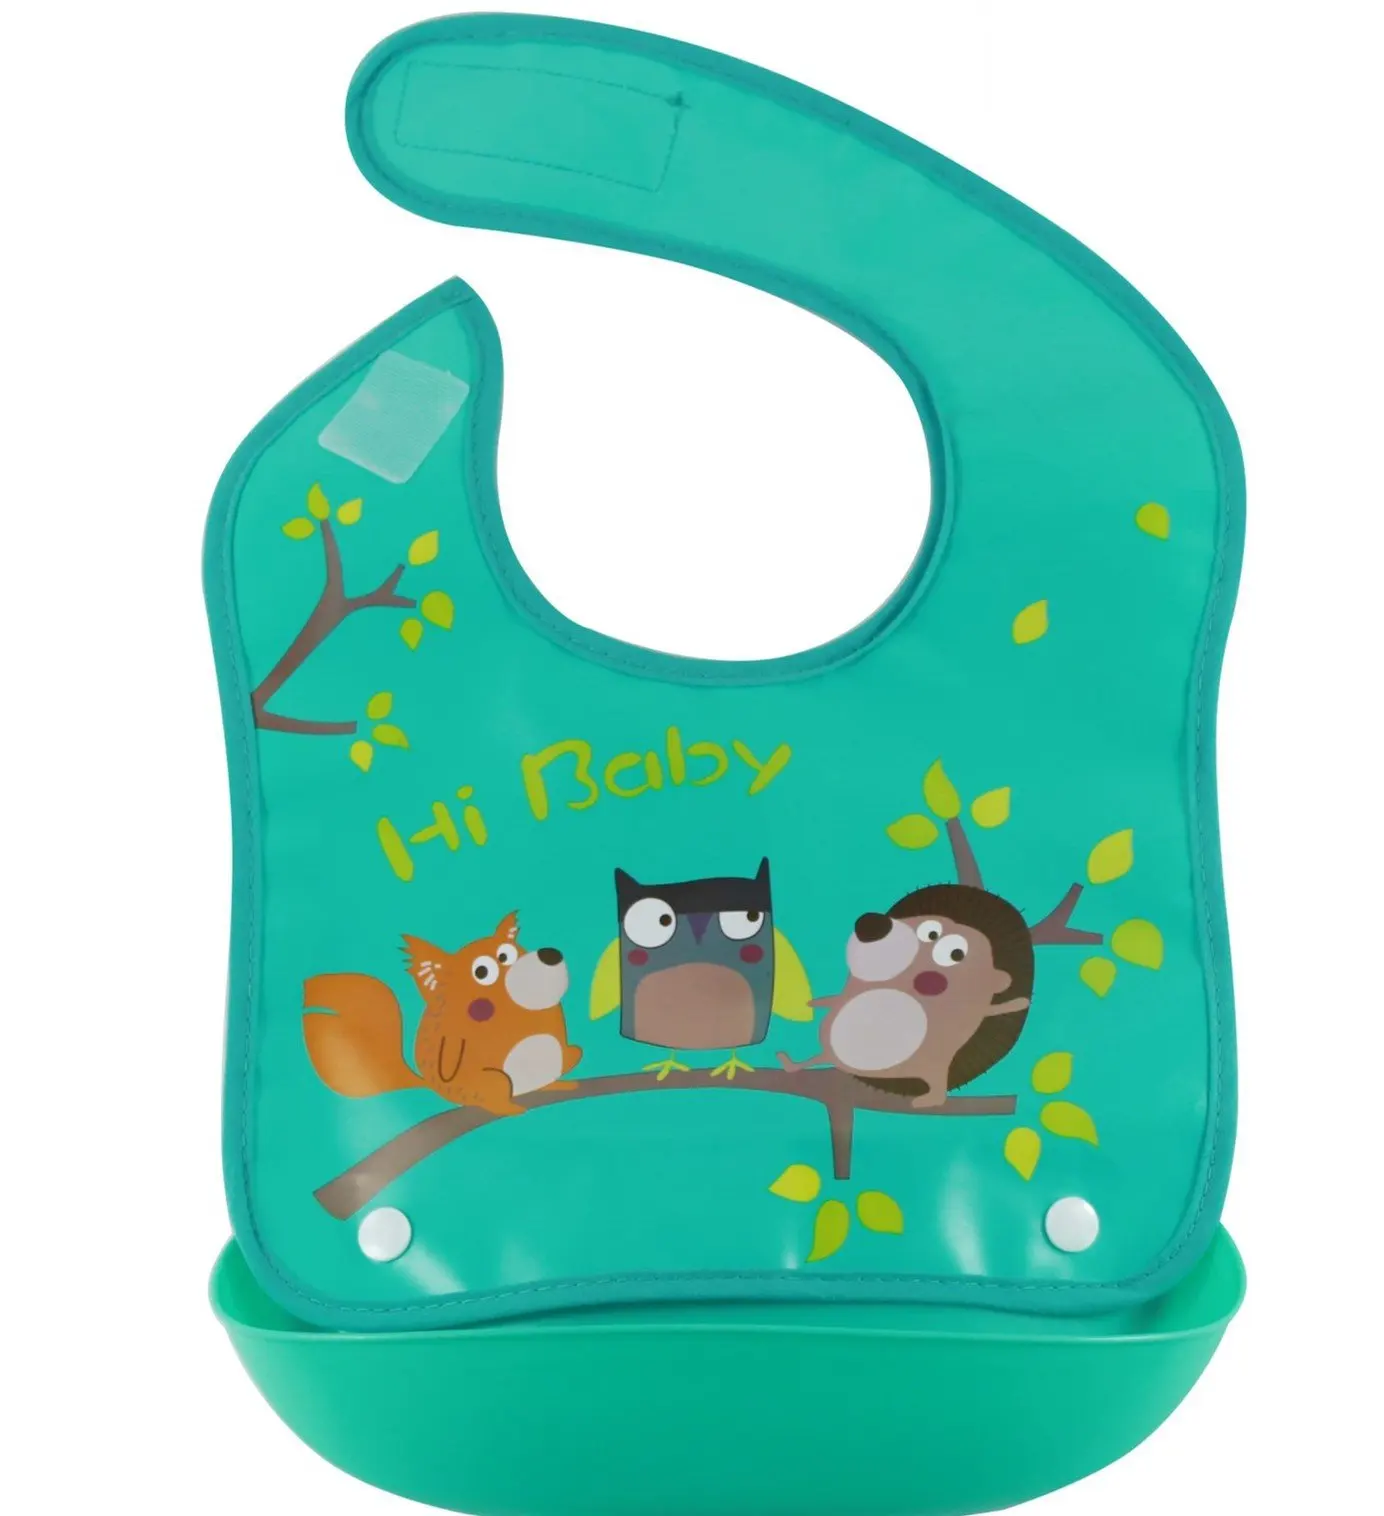 Cheap Rubber Bibs With Pocket, find 